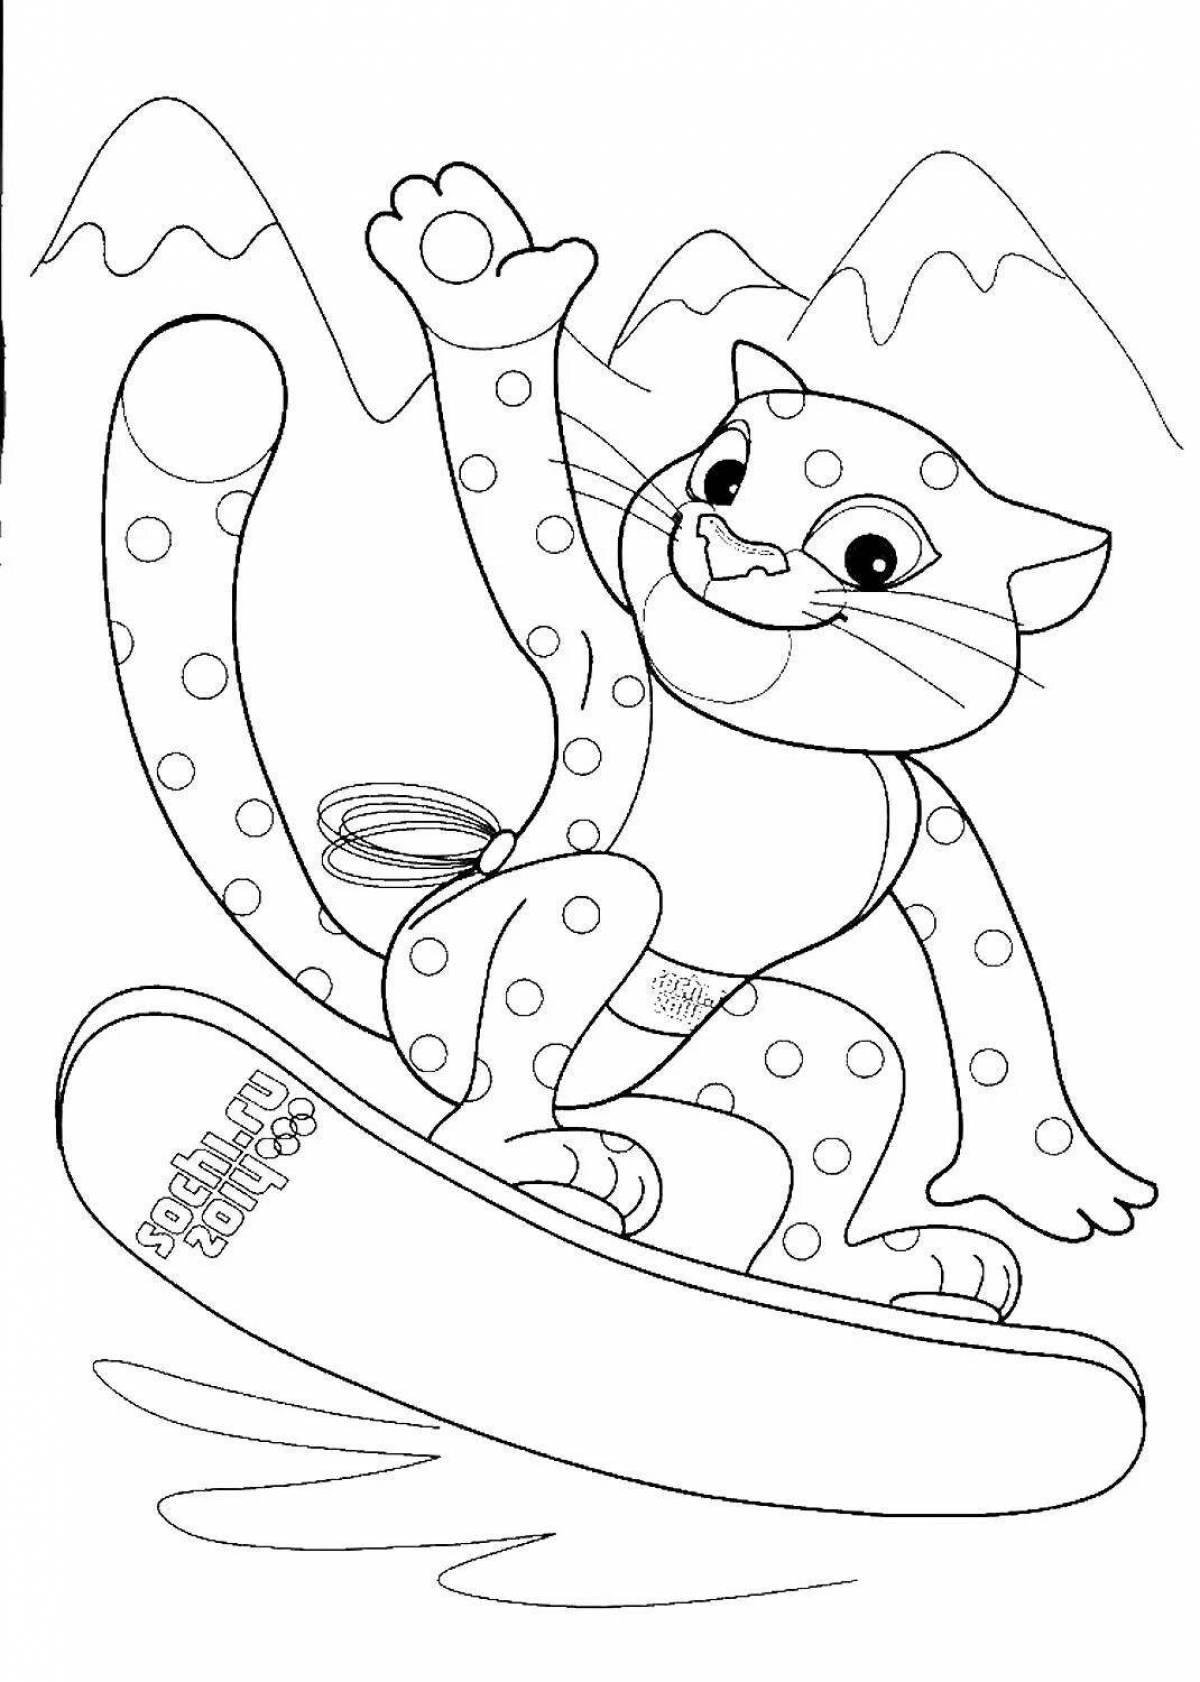 Glowing olympic winter games coloring page